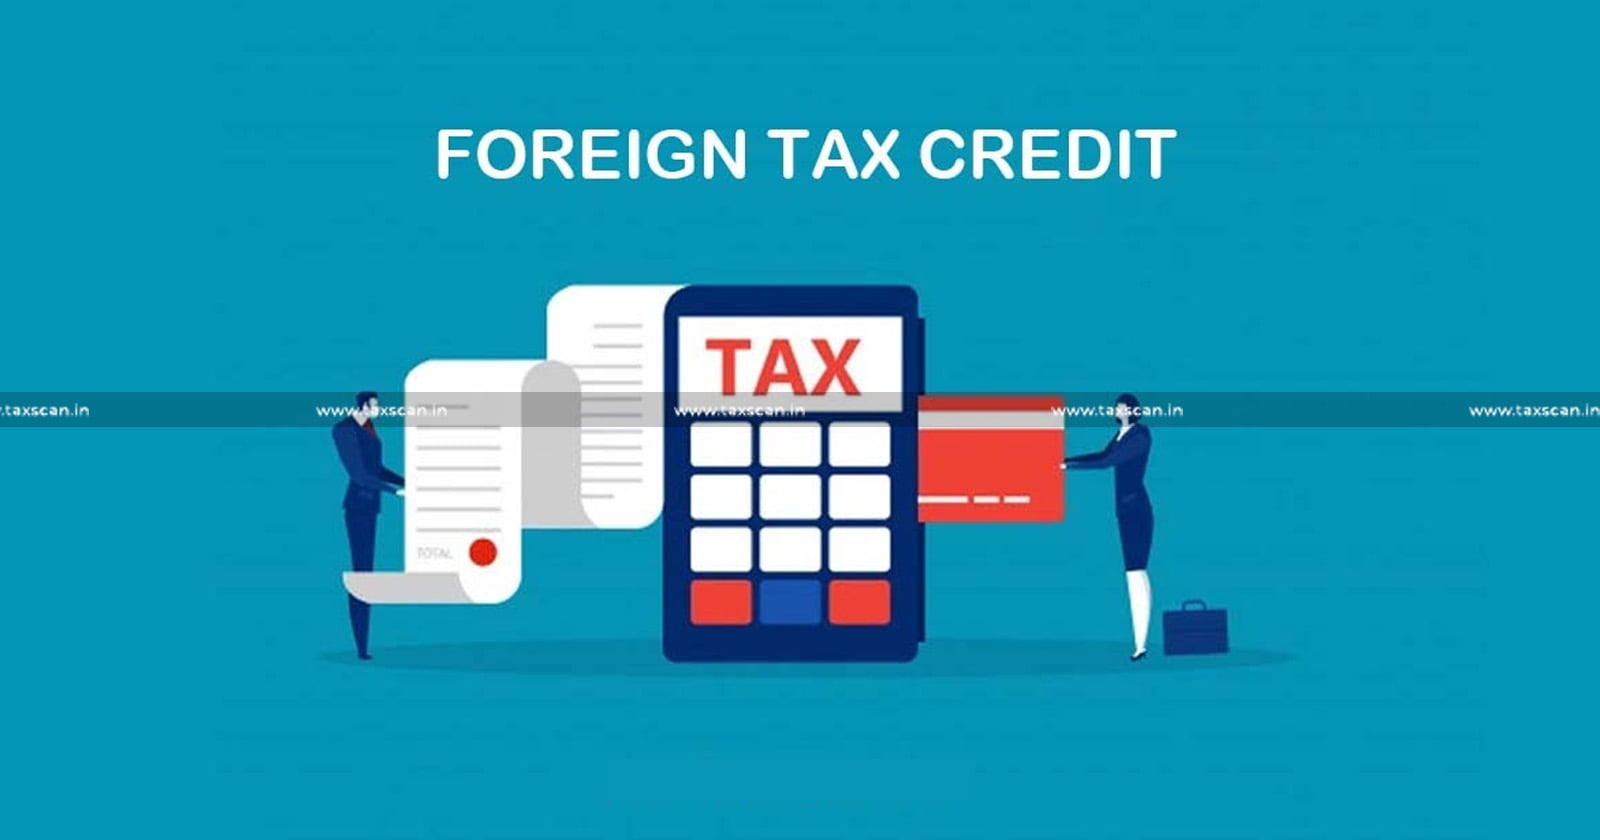 Foreign -Tax- Credit - Denied - Rule -128 - Income- Tax - Filed - filed - Completion - Assessment-ITAT-TAXSCAN